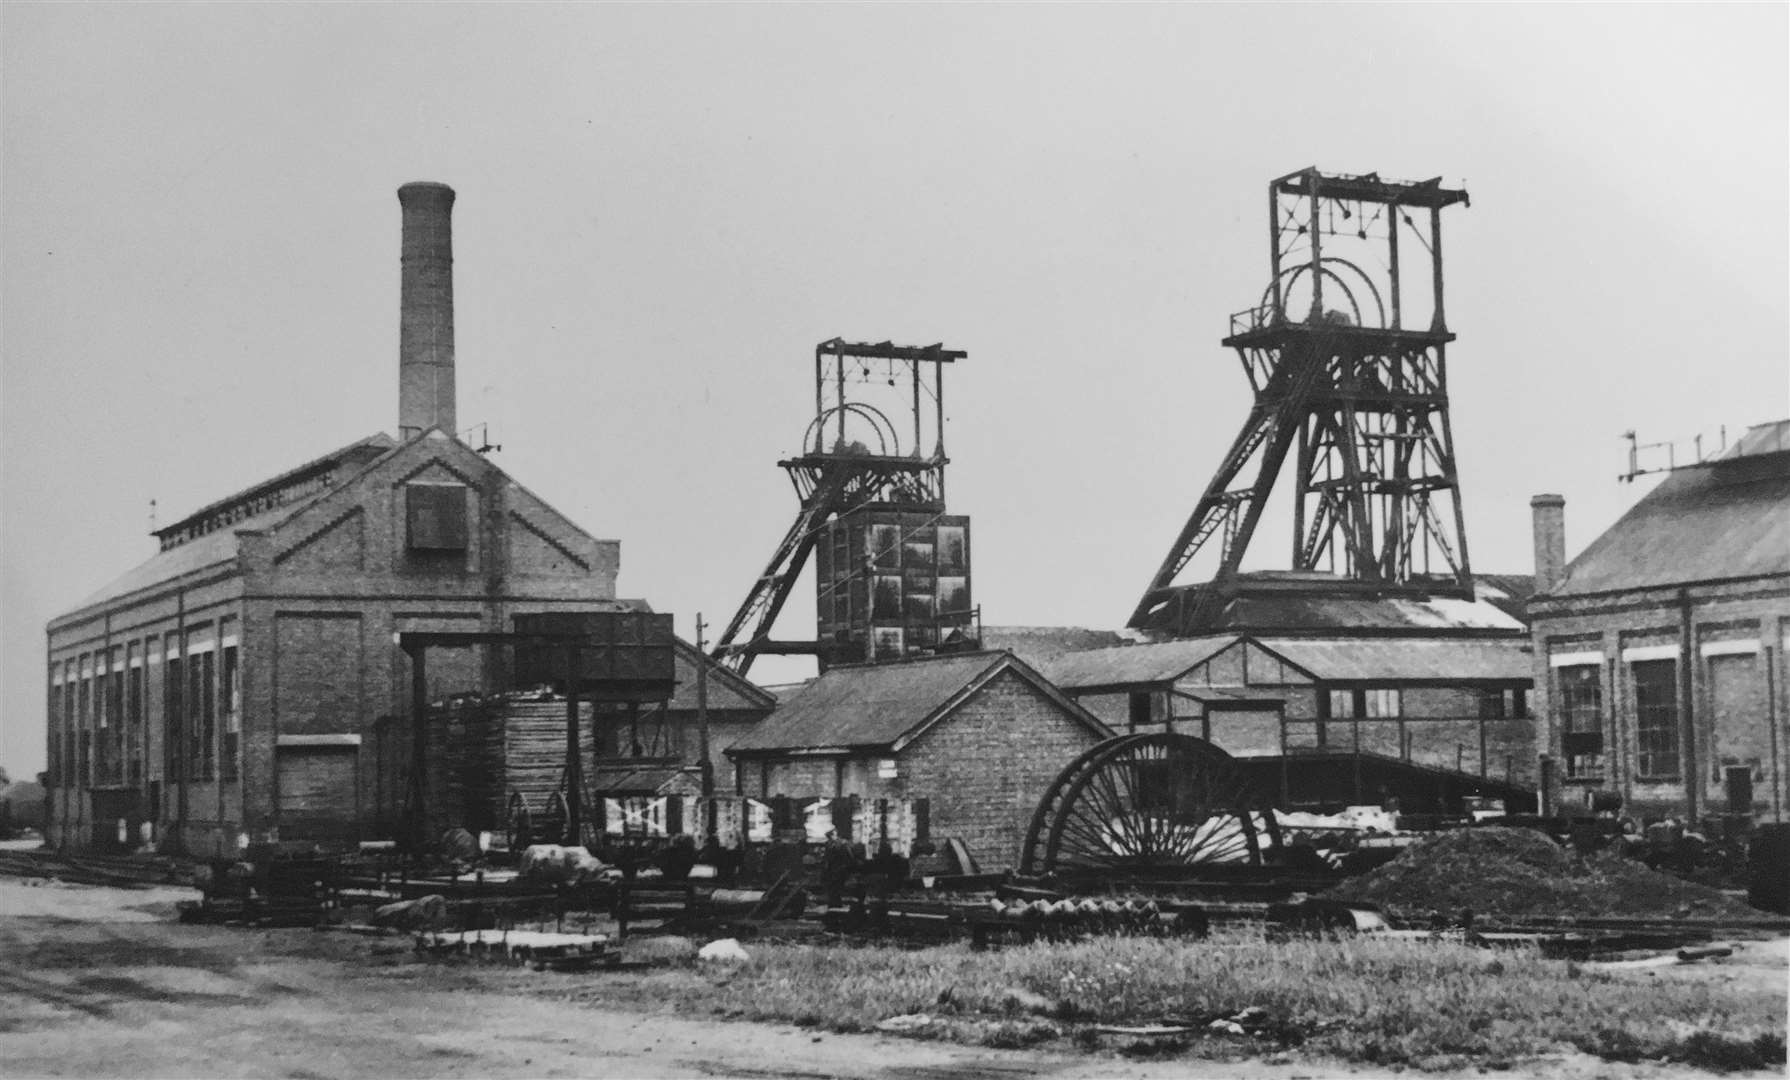 Snowdown Colliery, before it was closed. Picture: Colin Varrall